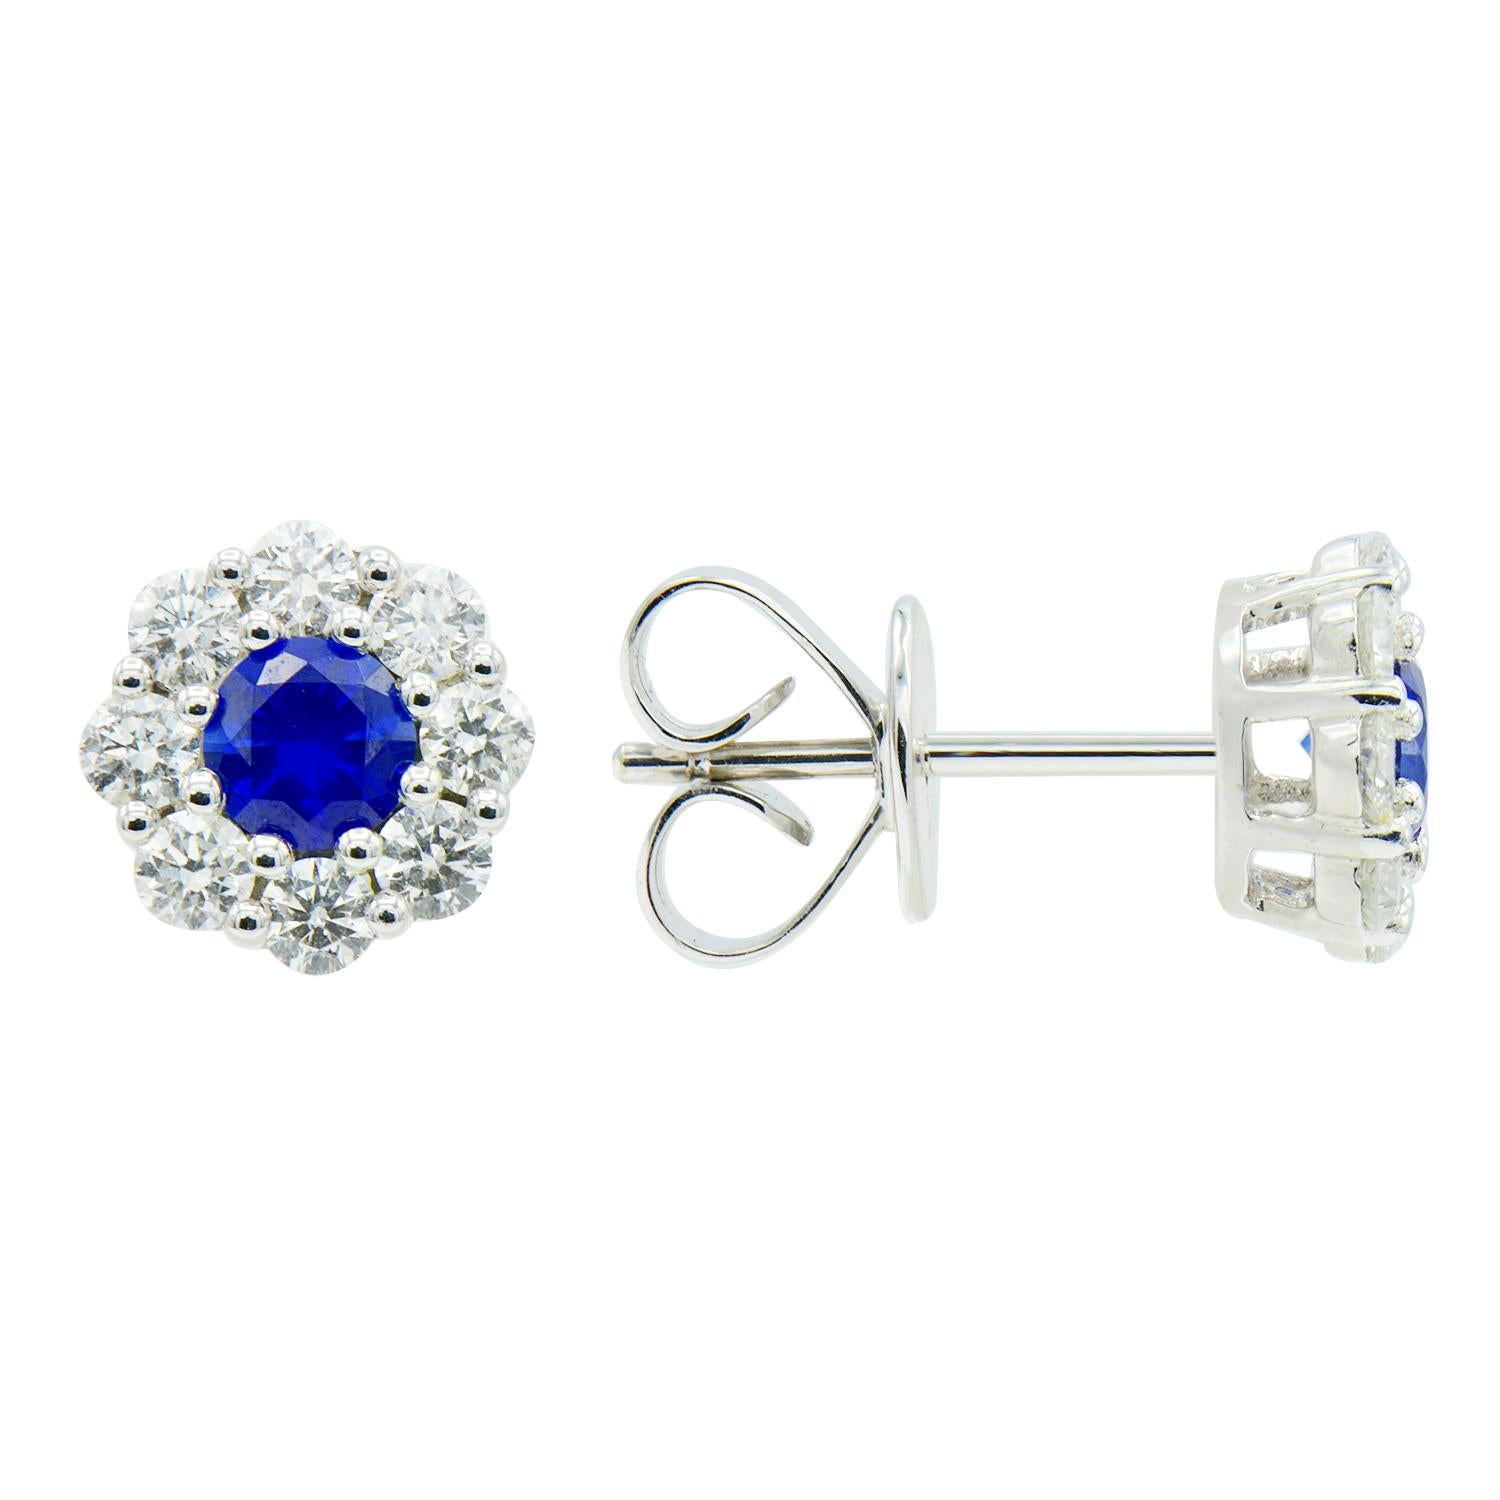 These stunning earrings are a classic staple to every jewelry collection. Each earring has a 0.23 carat sapphire in the middle surrounded by 8 shining diamonds. There is a total of 0.46 carats of sapphires and 0.55 carats of diamonds. These earrings